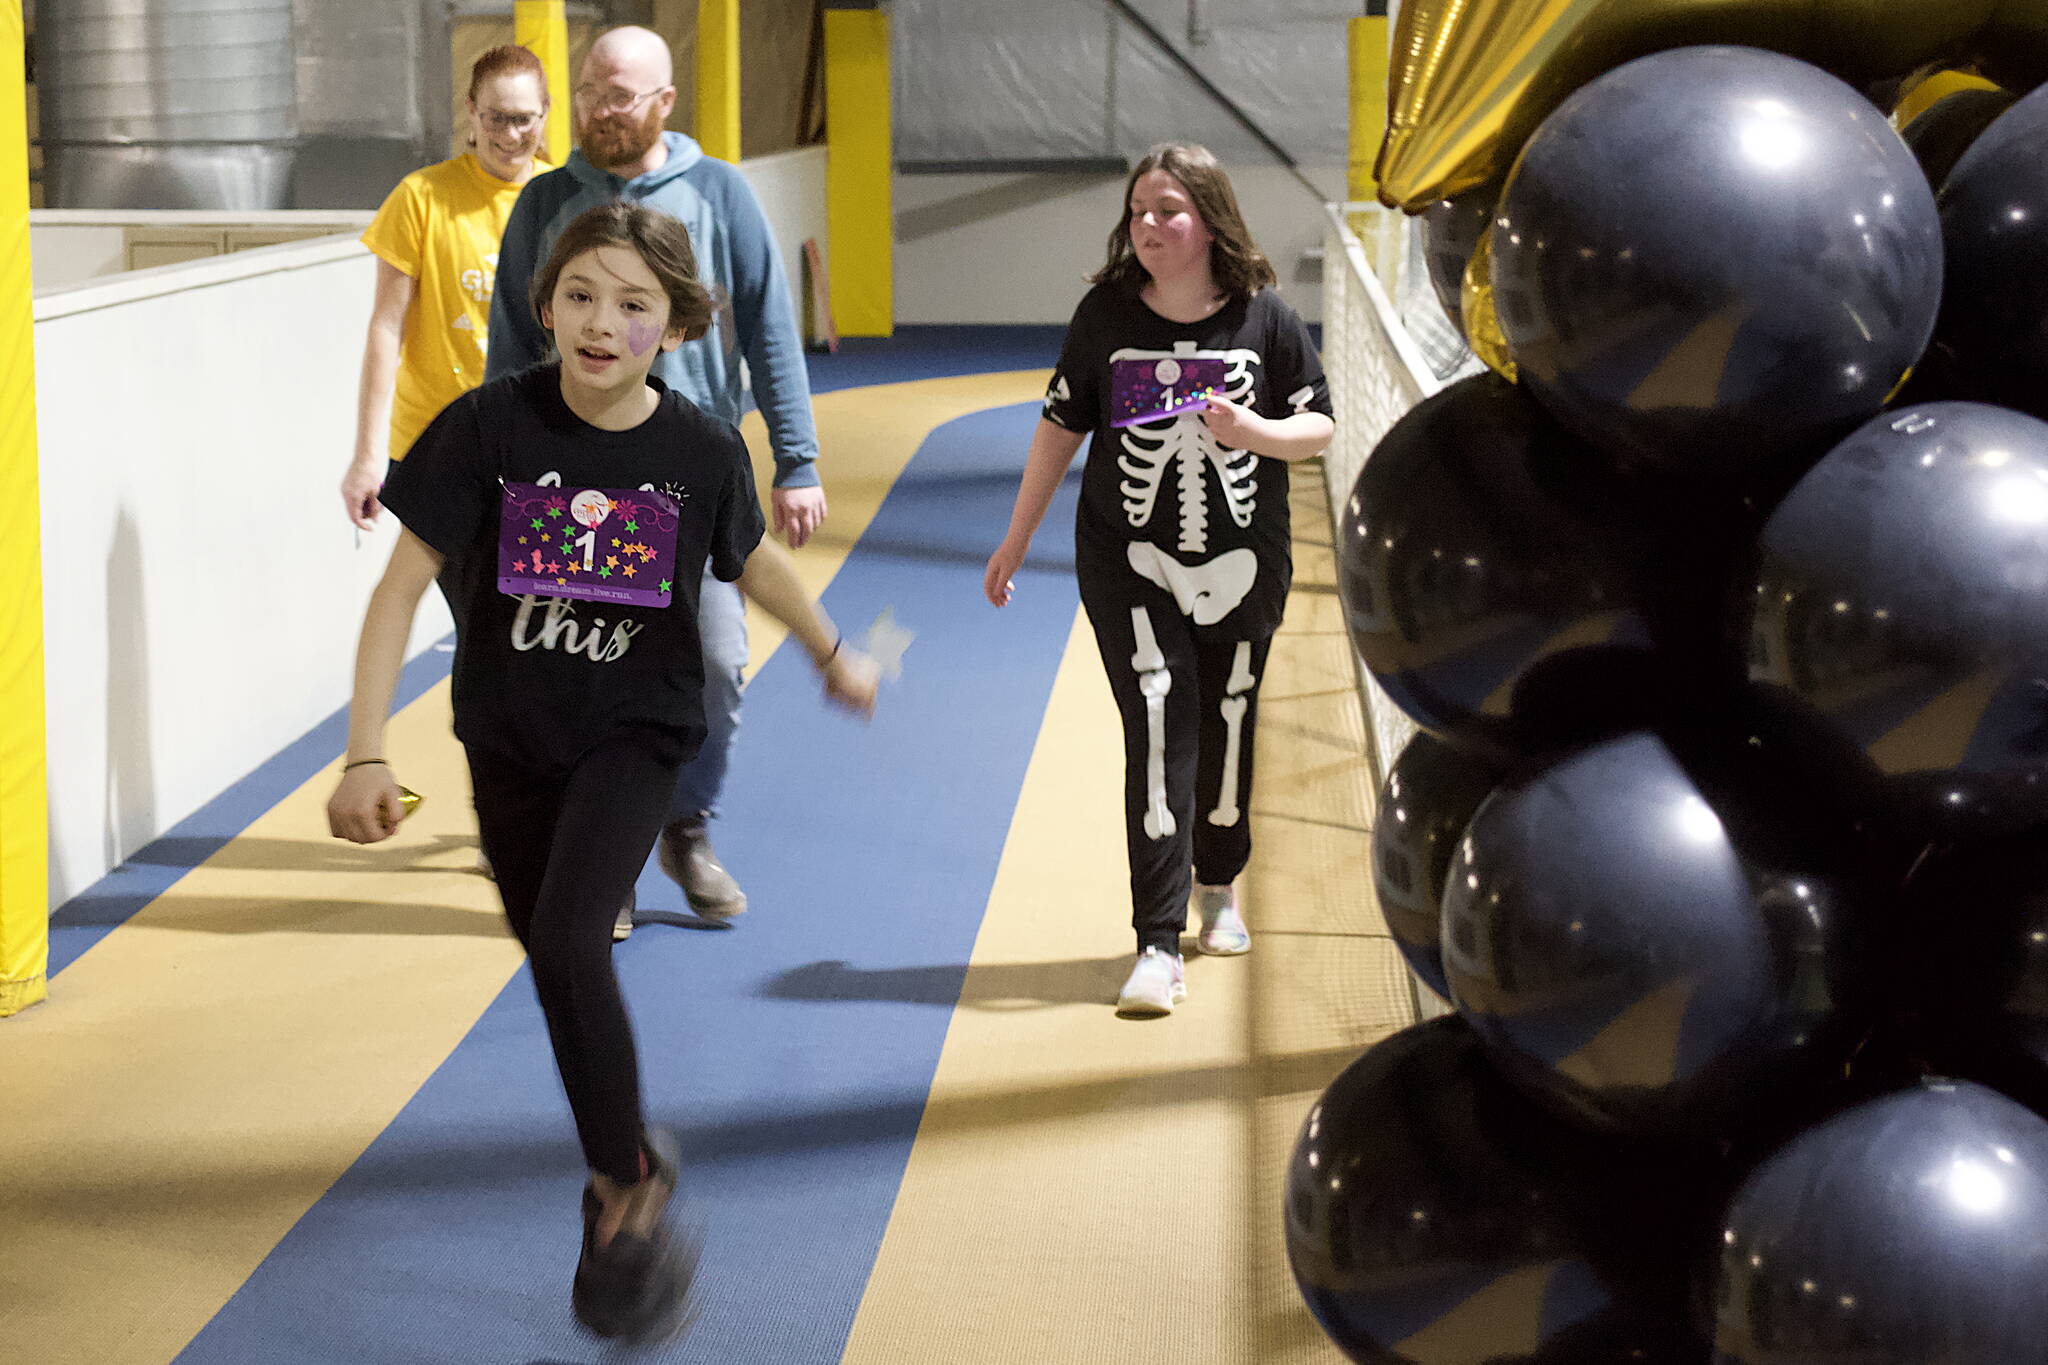 Mark Sabbatini / Juneau Empire
Casey Blackwell, 10, crosses the finish line after running 27 laps around the indoor track at Dimond Park Field House to complete the 5K Pajama Jog on Sunday.